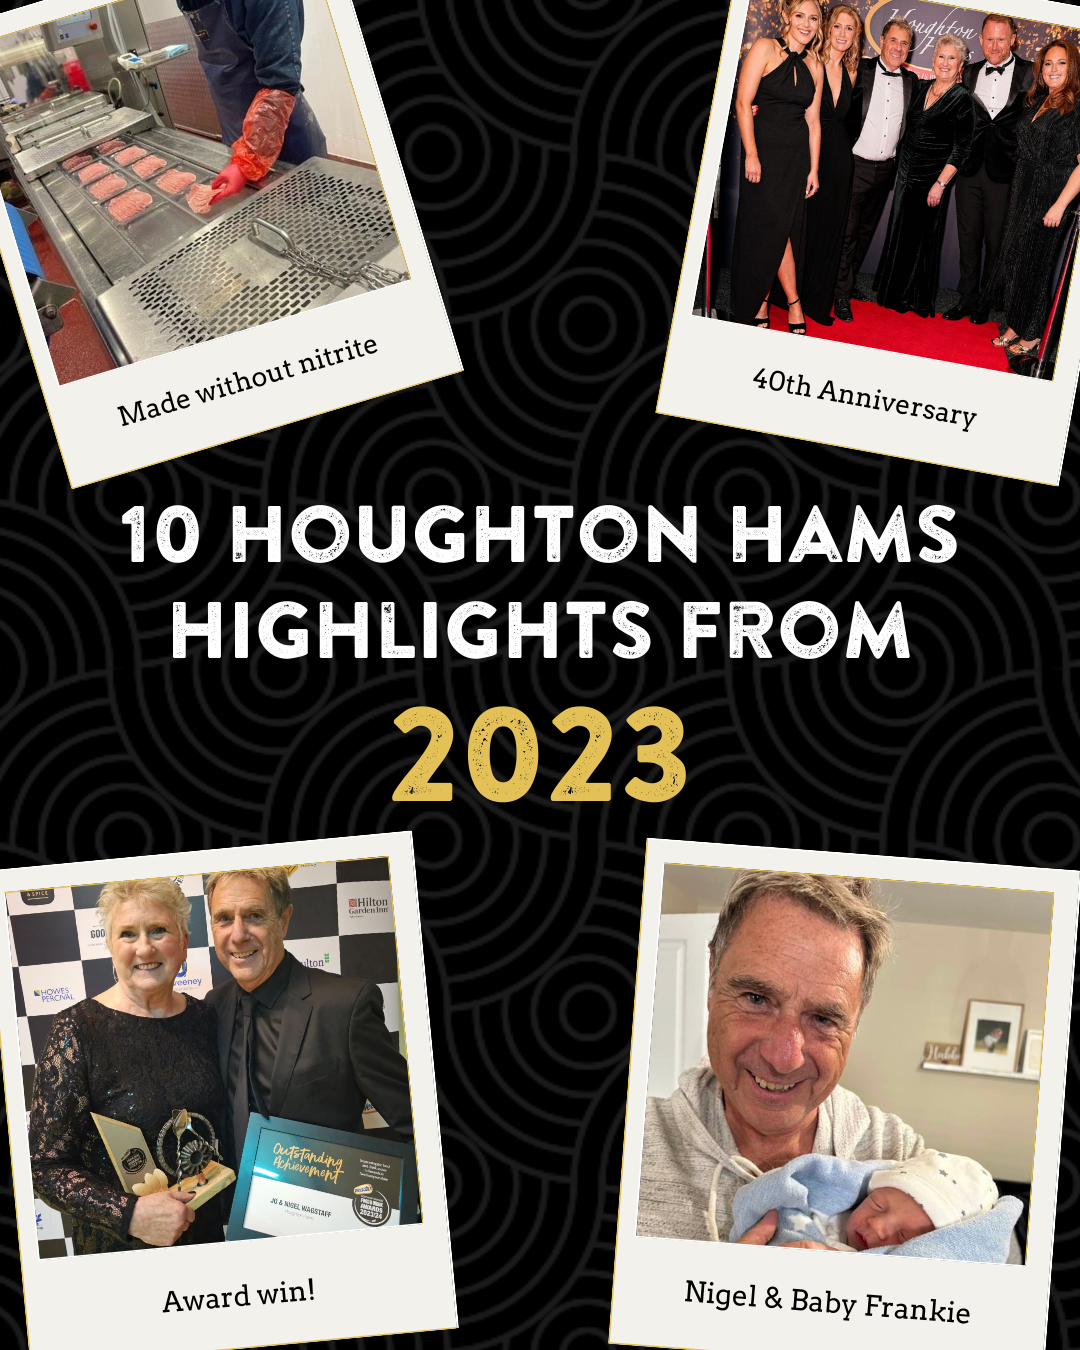 10 Houghton Hams Highlights from 2023